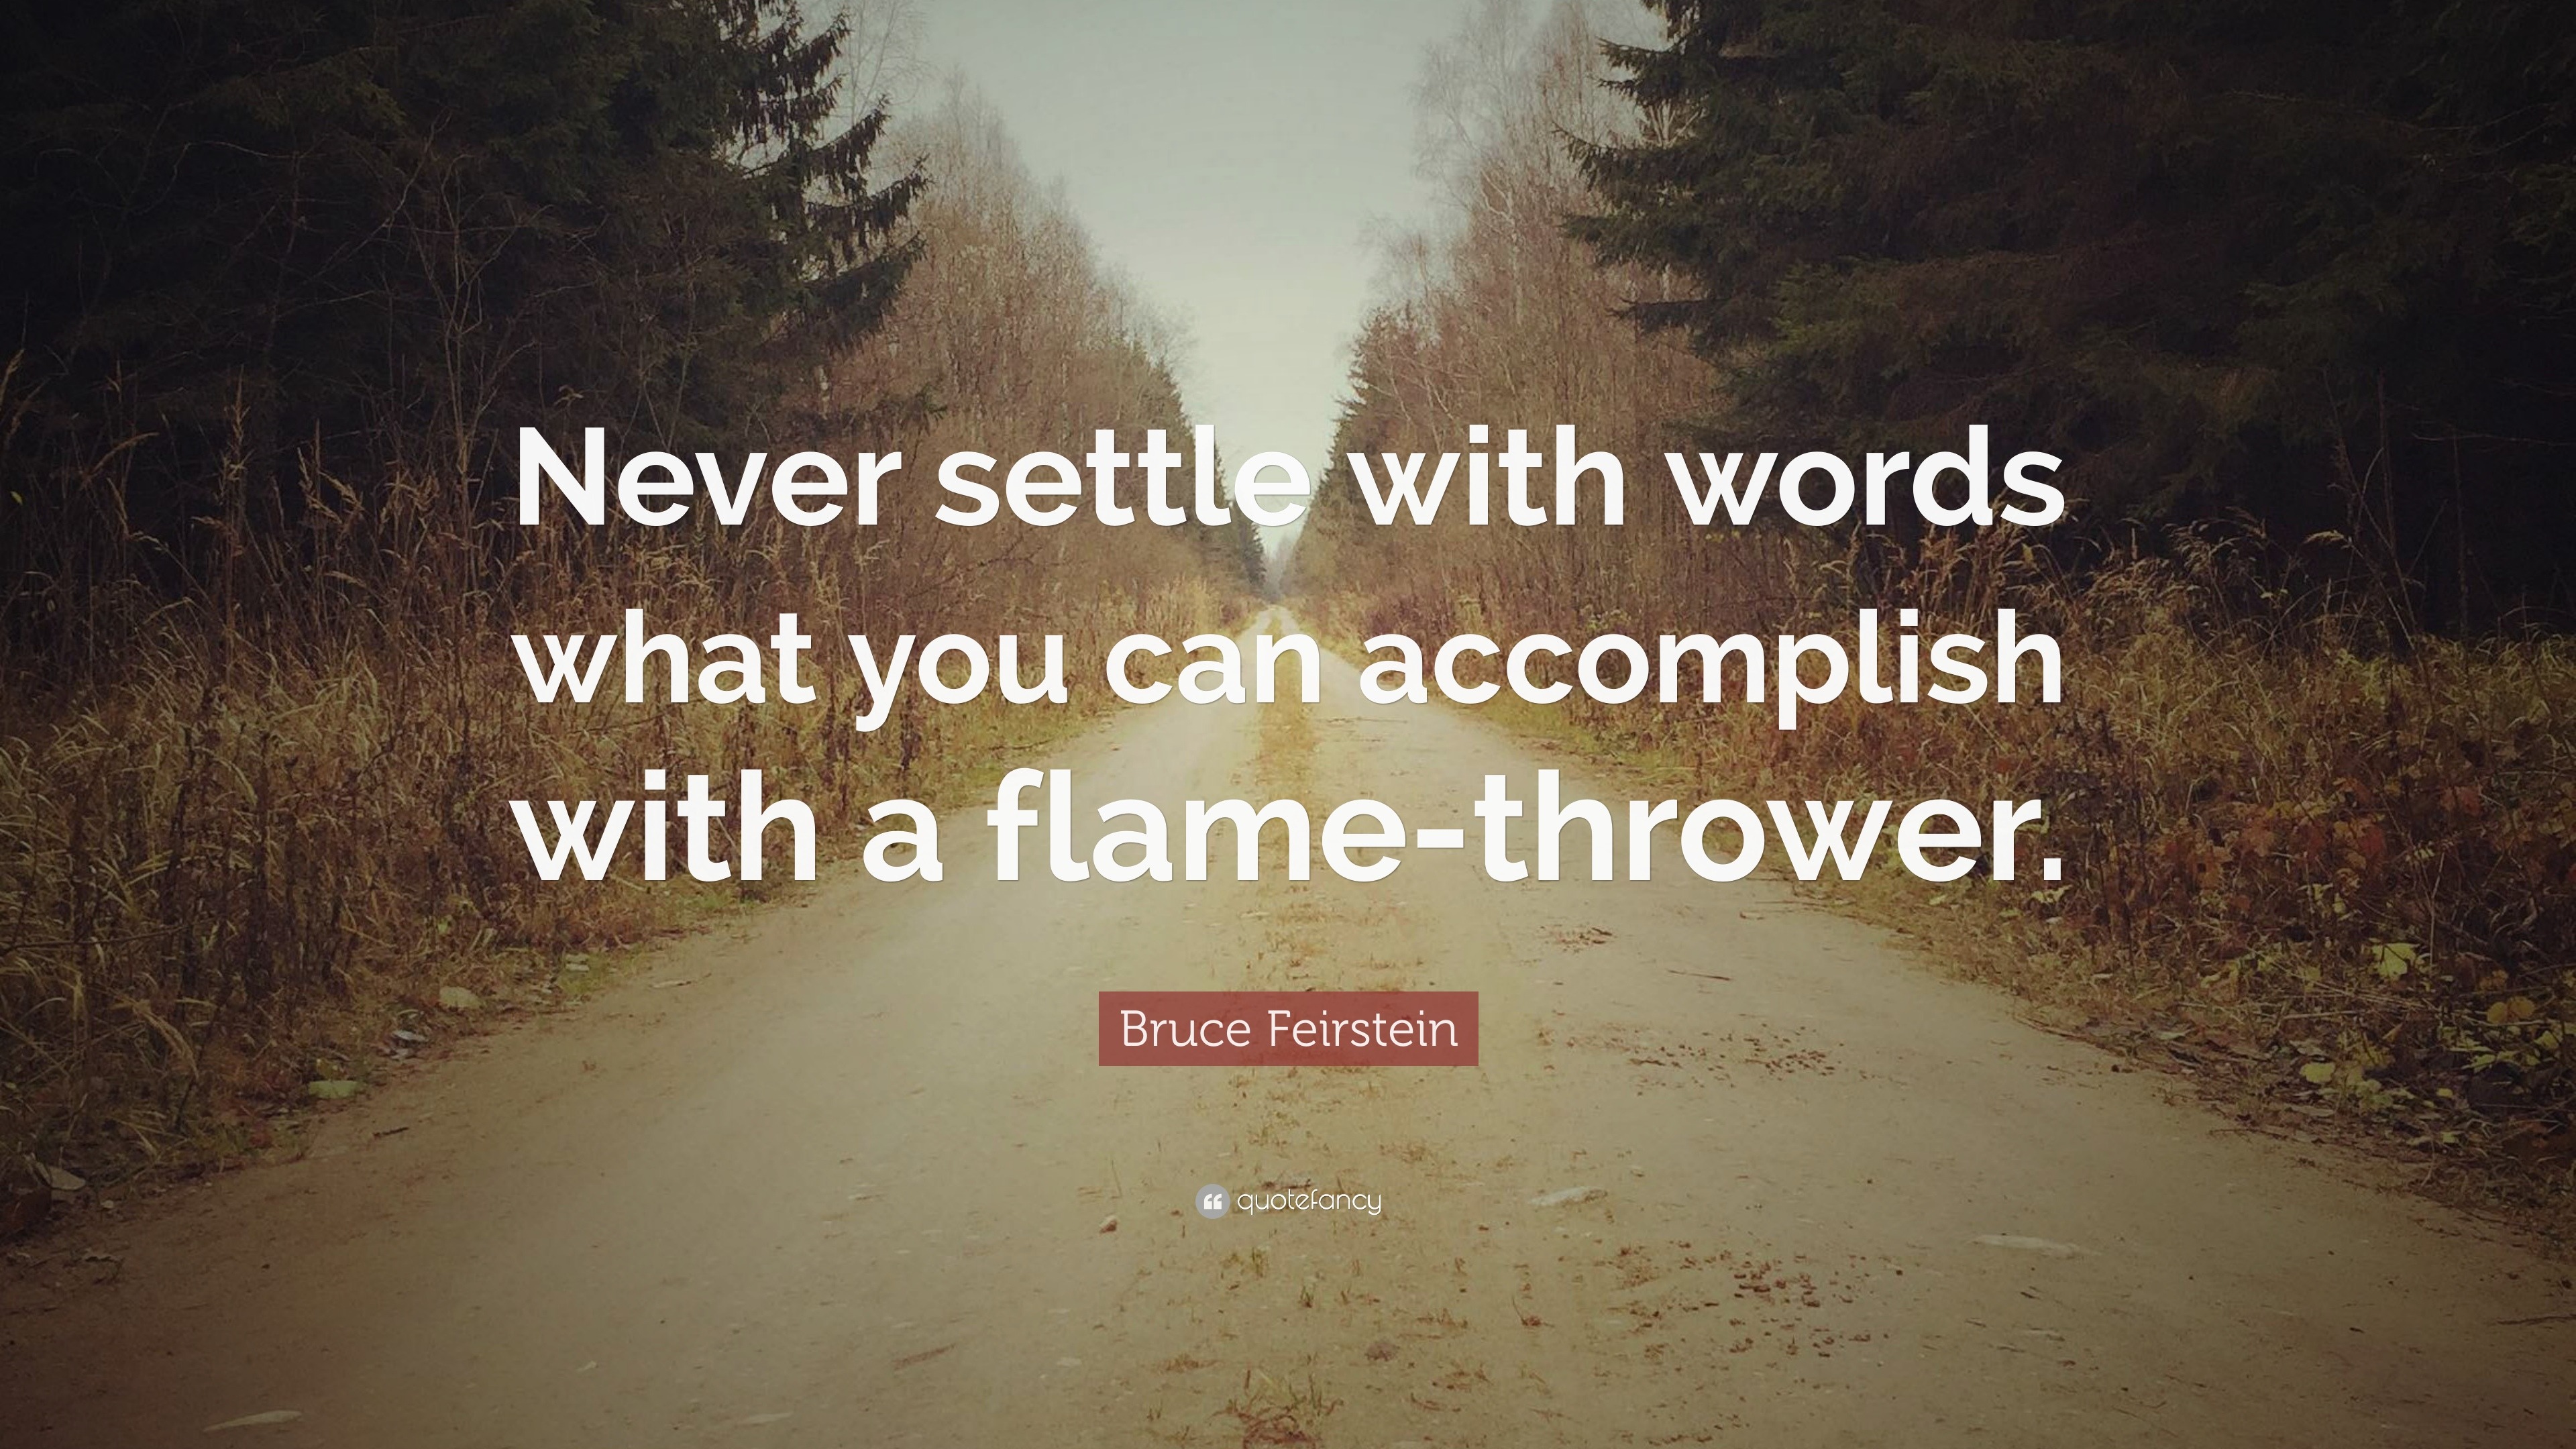 Bruce Feirstein Quote “Never settle with words what you can ac plish with a flame